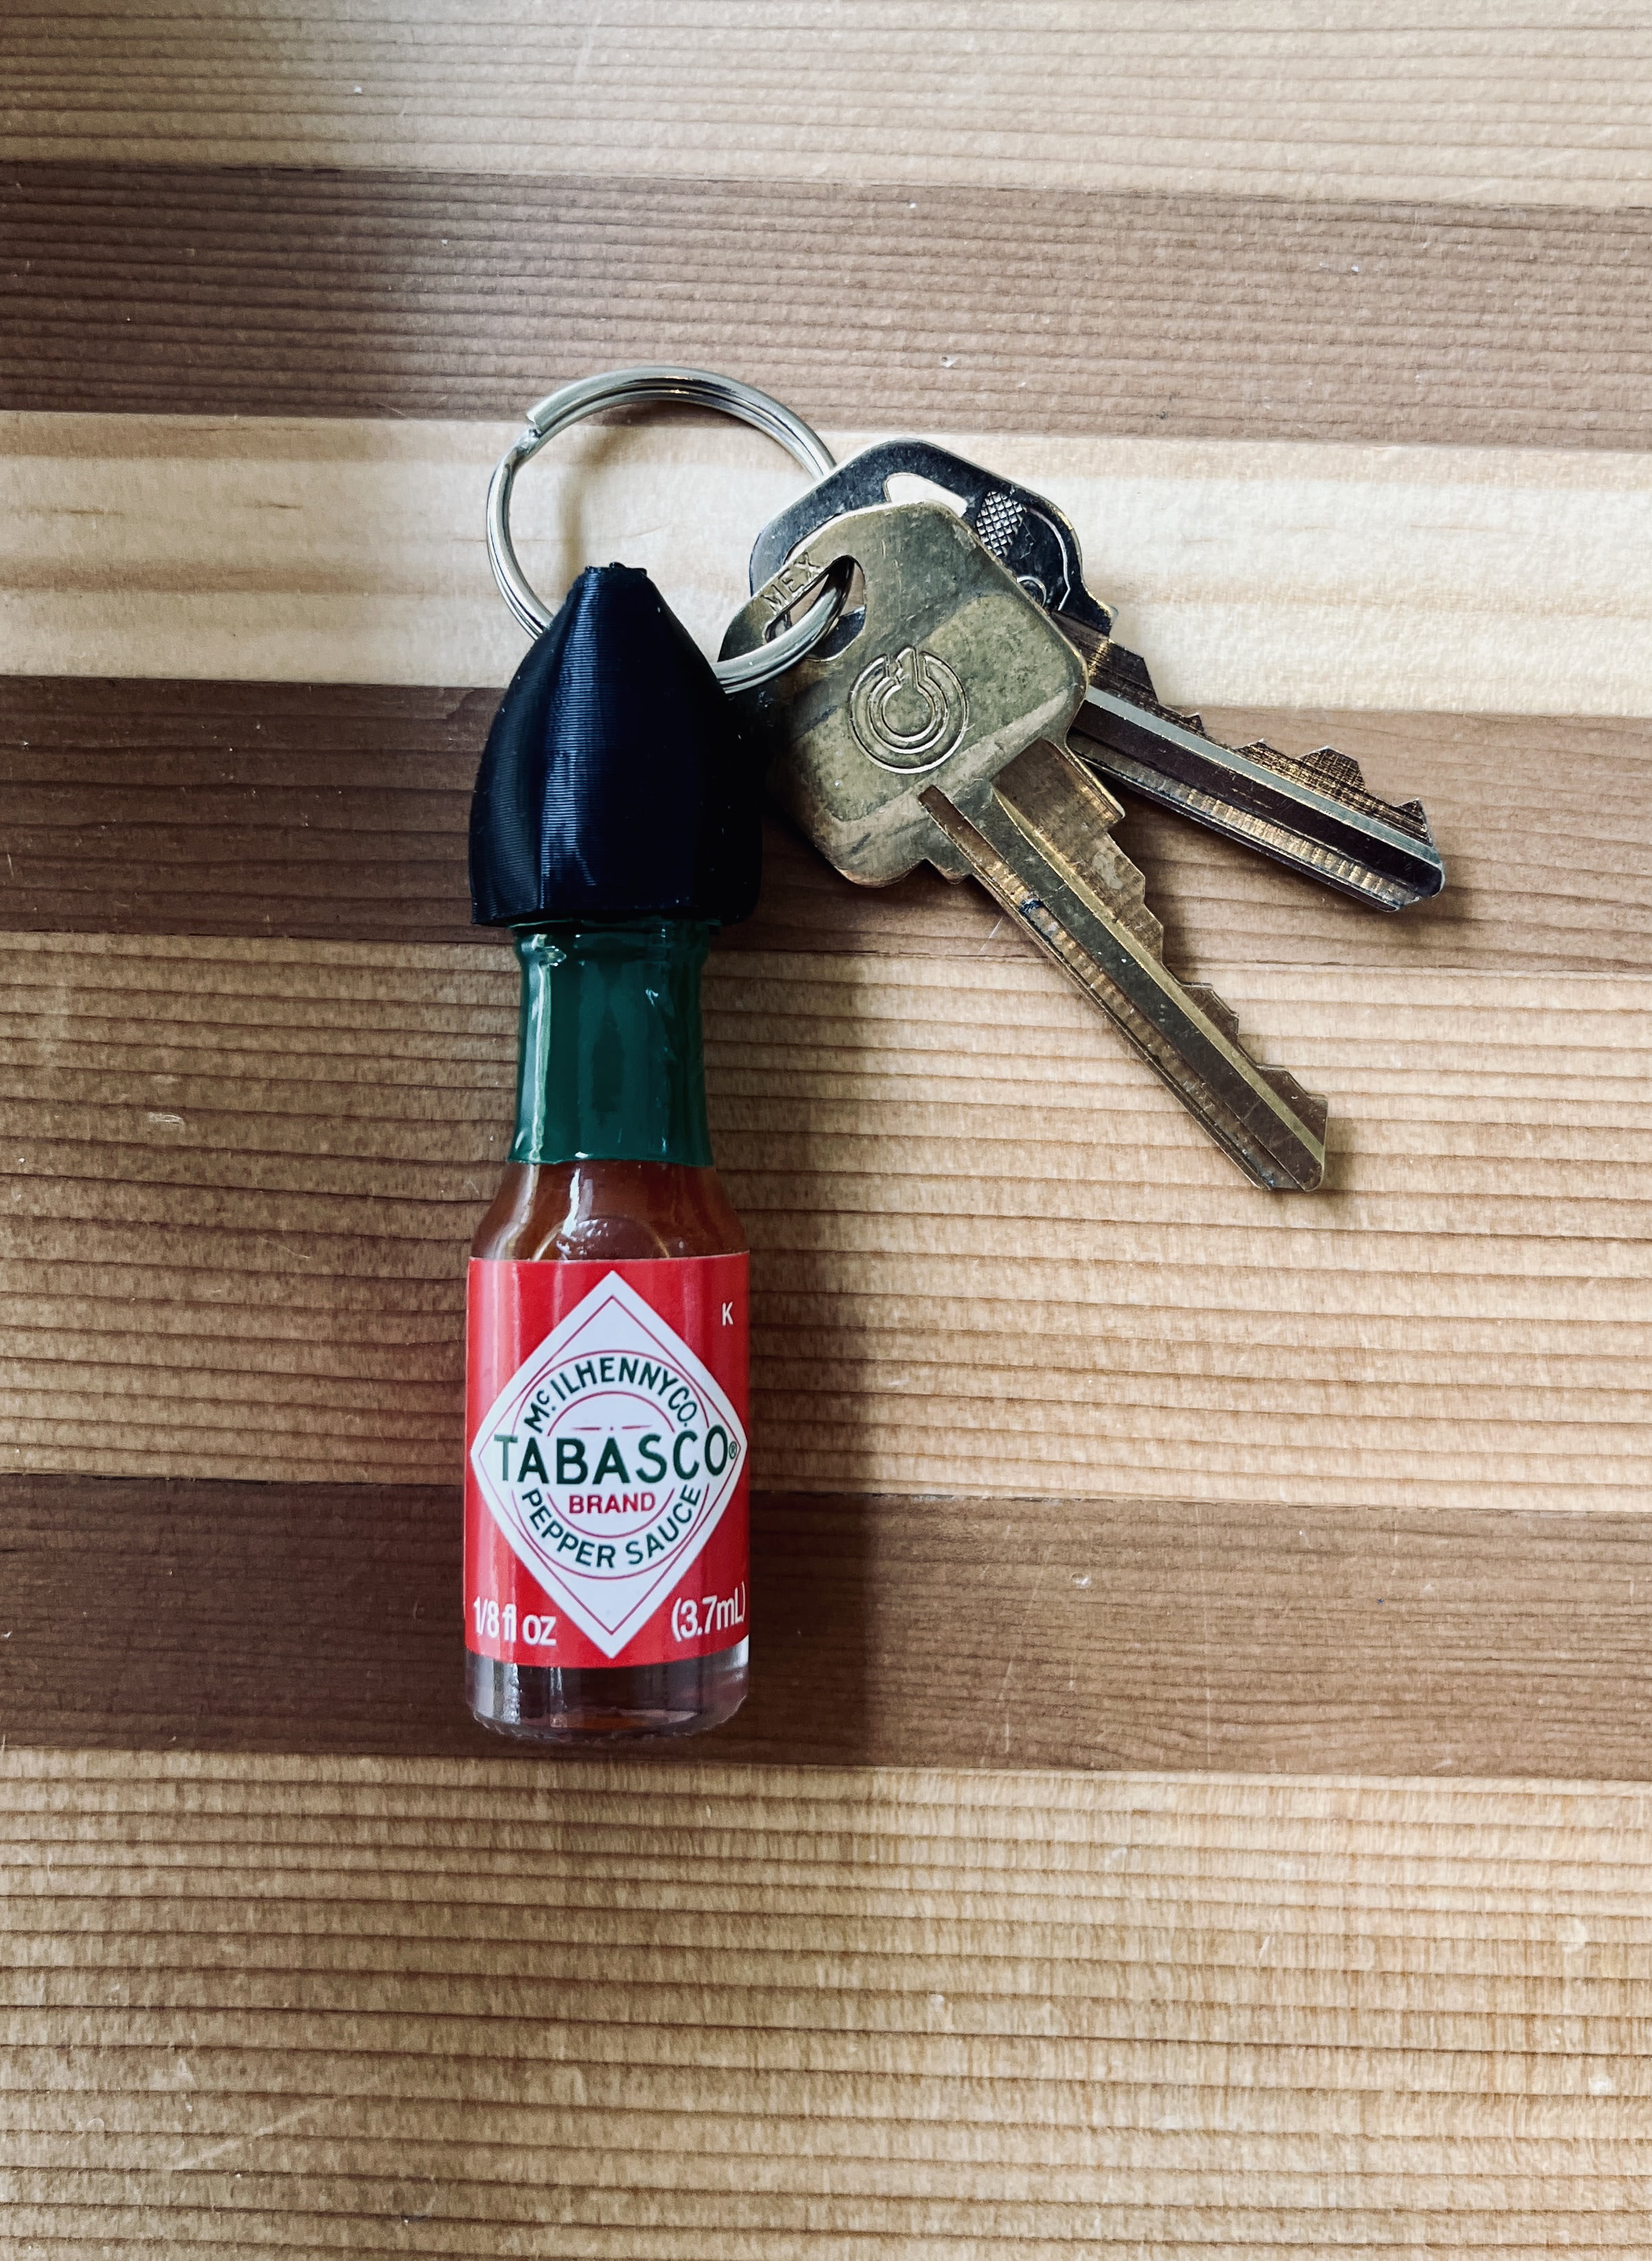  Tabasco Sauce Keychain - Includes Mini Bottle of Original Hot  Sauce. Miniature Individual Size Perfect for Travel, Key Chain or Purse.  Refillable and Strong. : Grocery & Gourmet Food